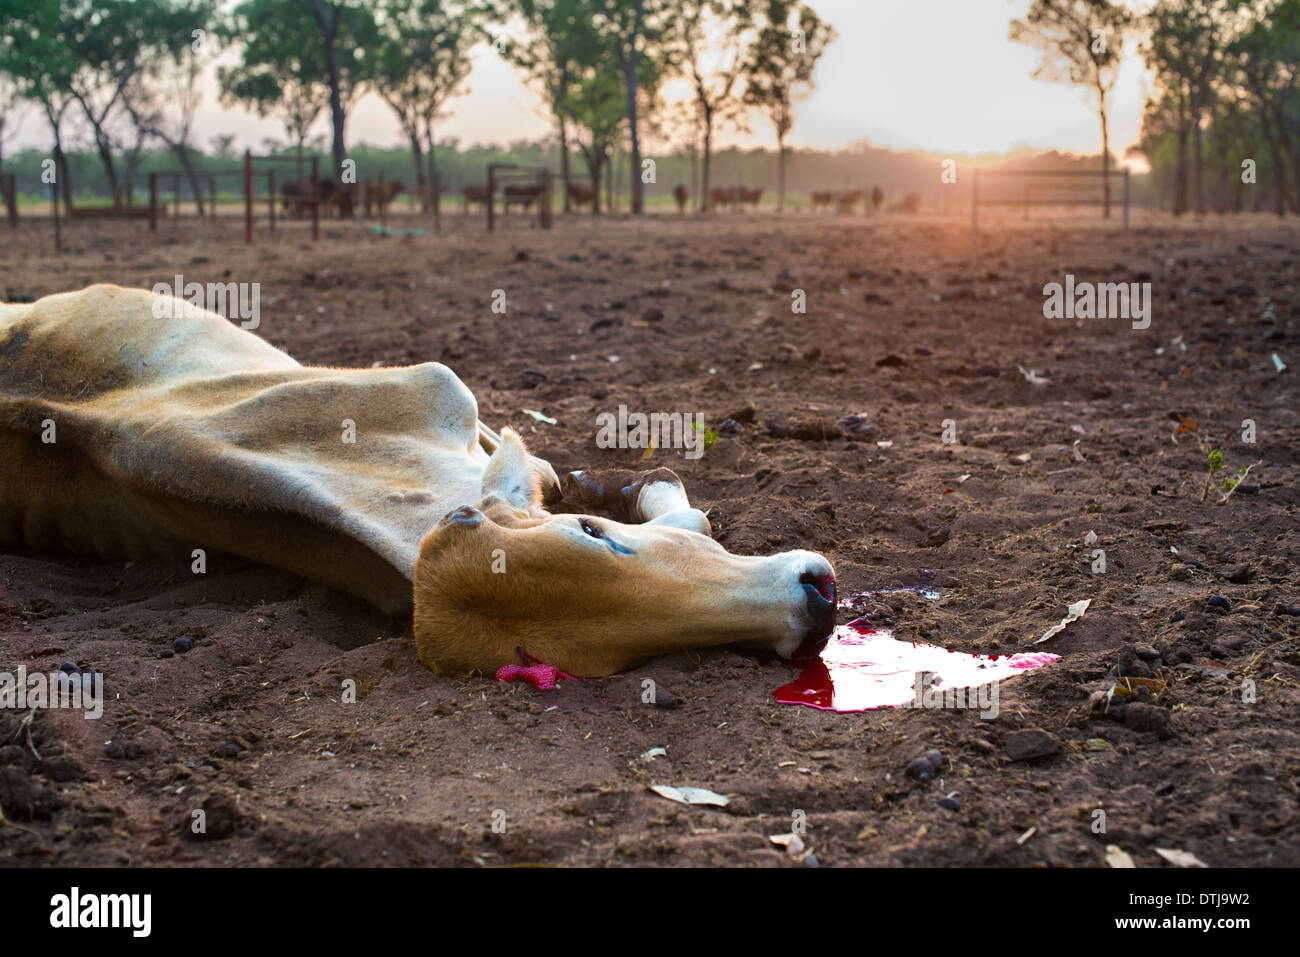 Shot cow lying on the ground, with blood puddle, at sunrise Stock Photo